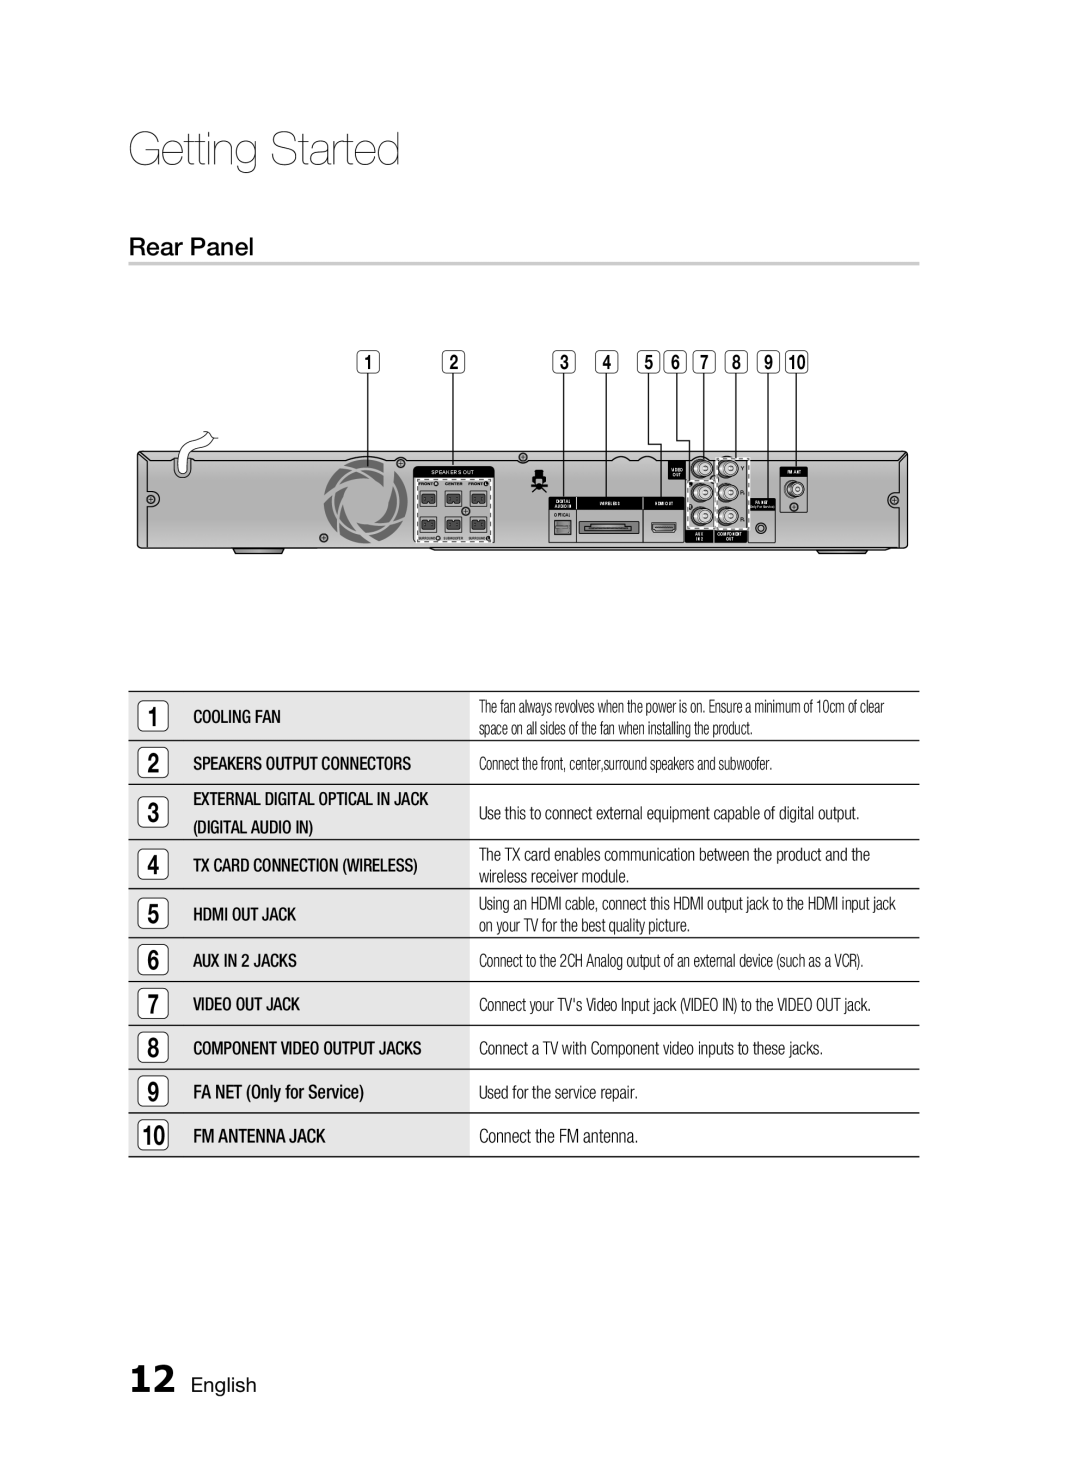 Samsung HT-D553, HT-D555, HT-D550 user manual Rear Panel, English, Getting Started 